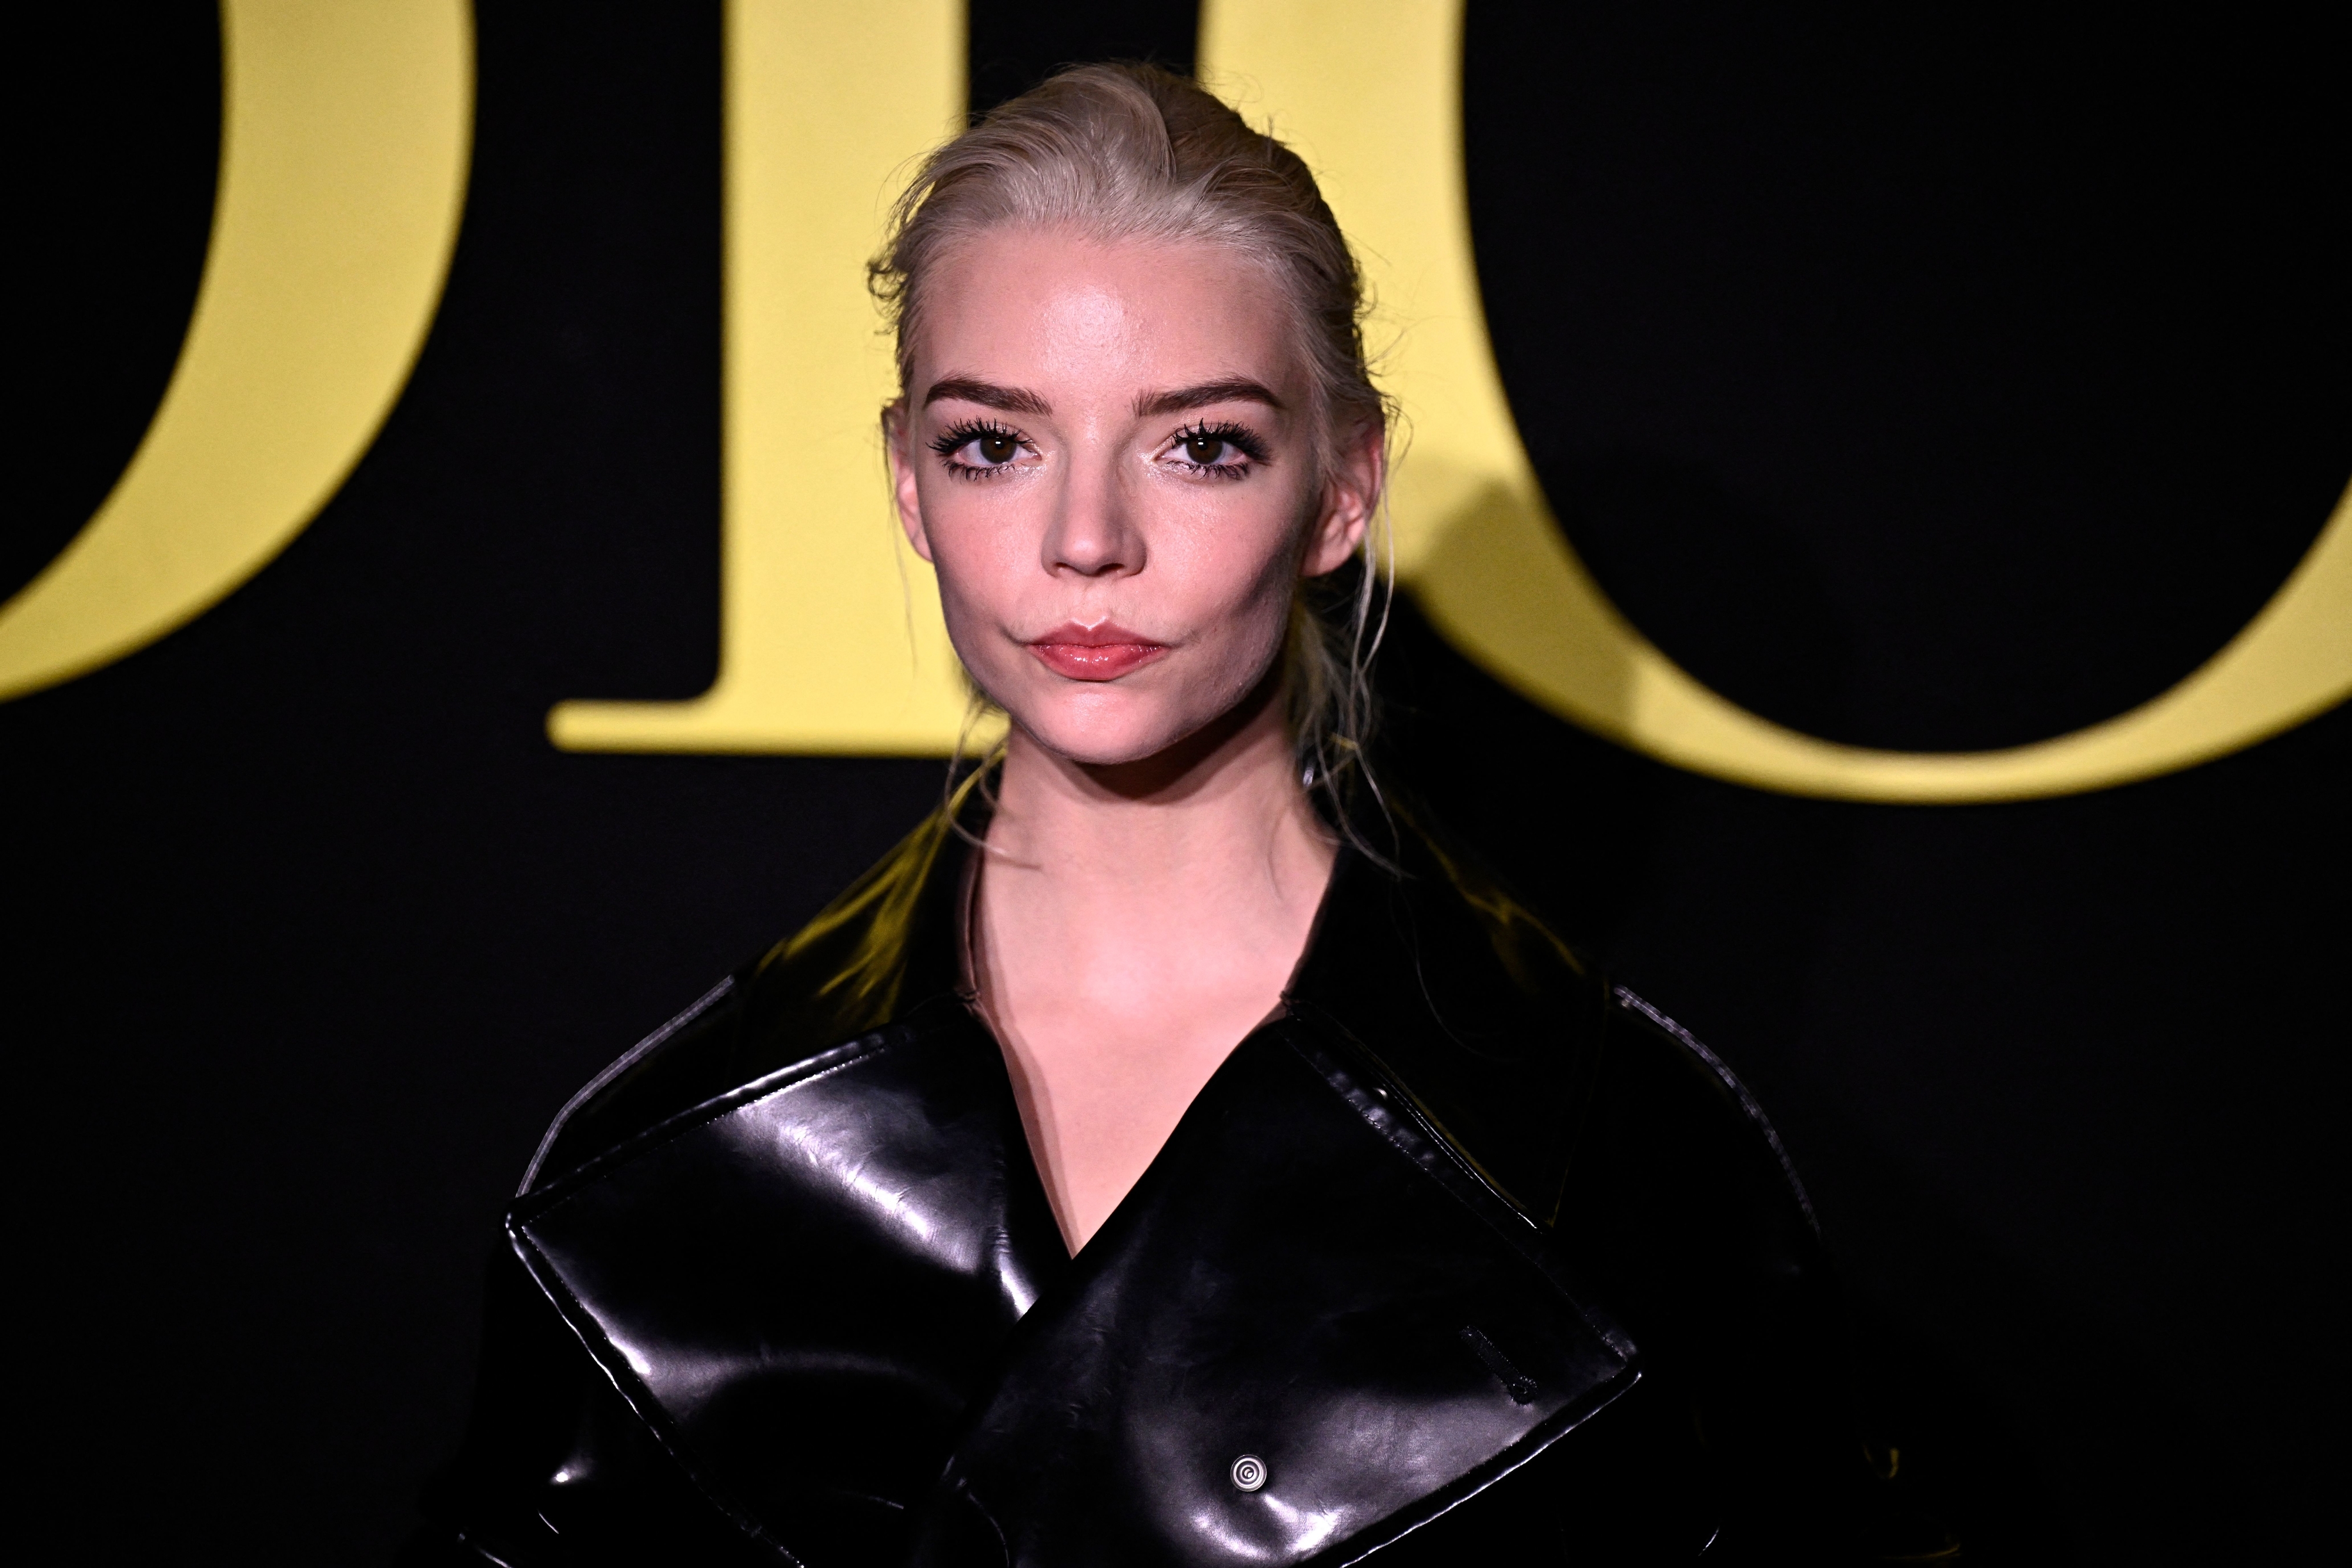 Anya Taylor-Joy marries Malcolm McRae in Italy with celeb